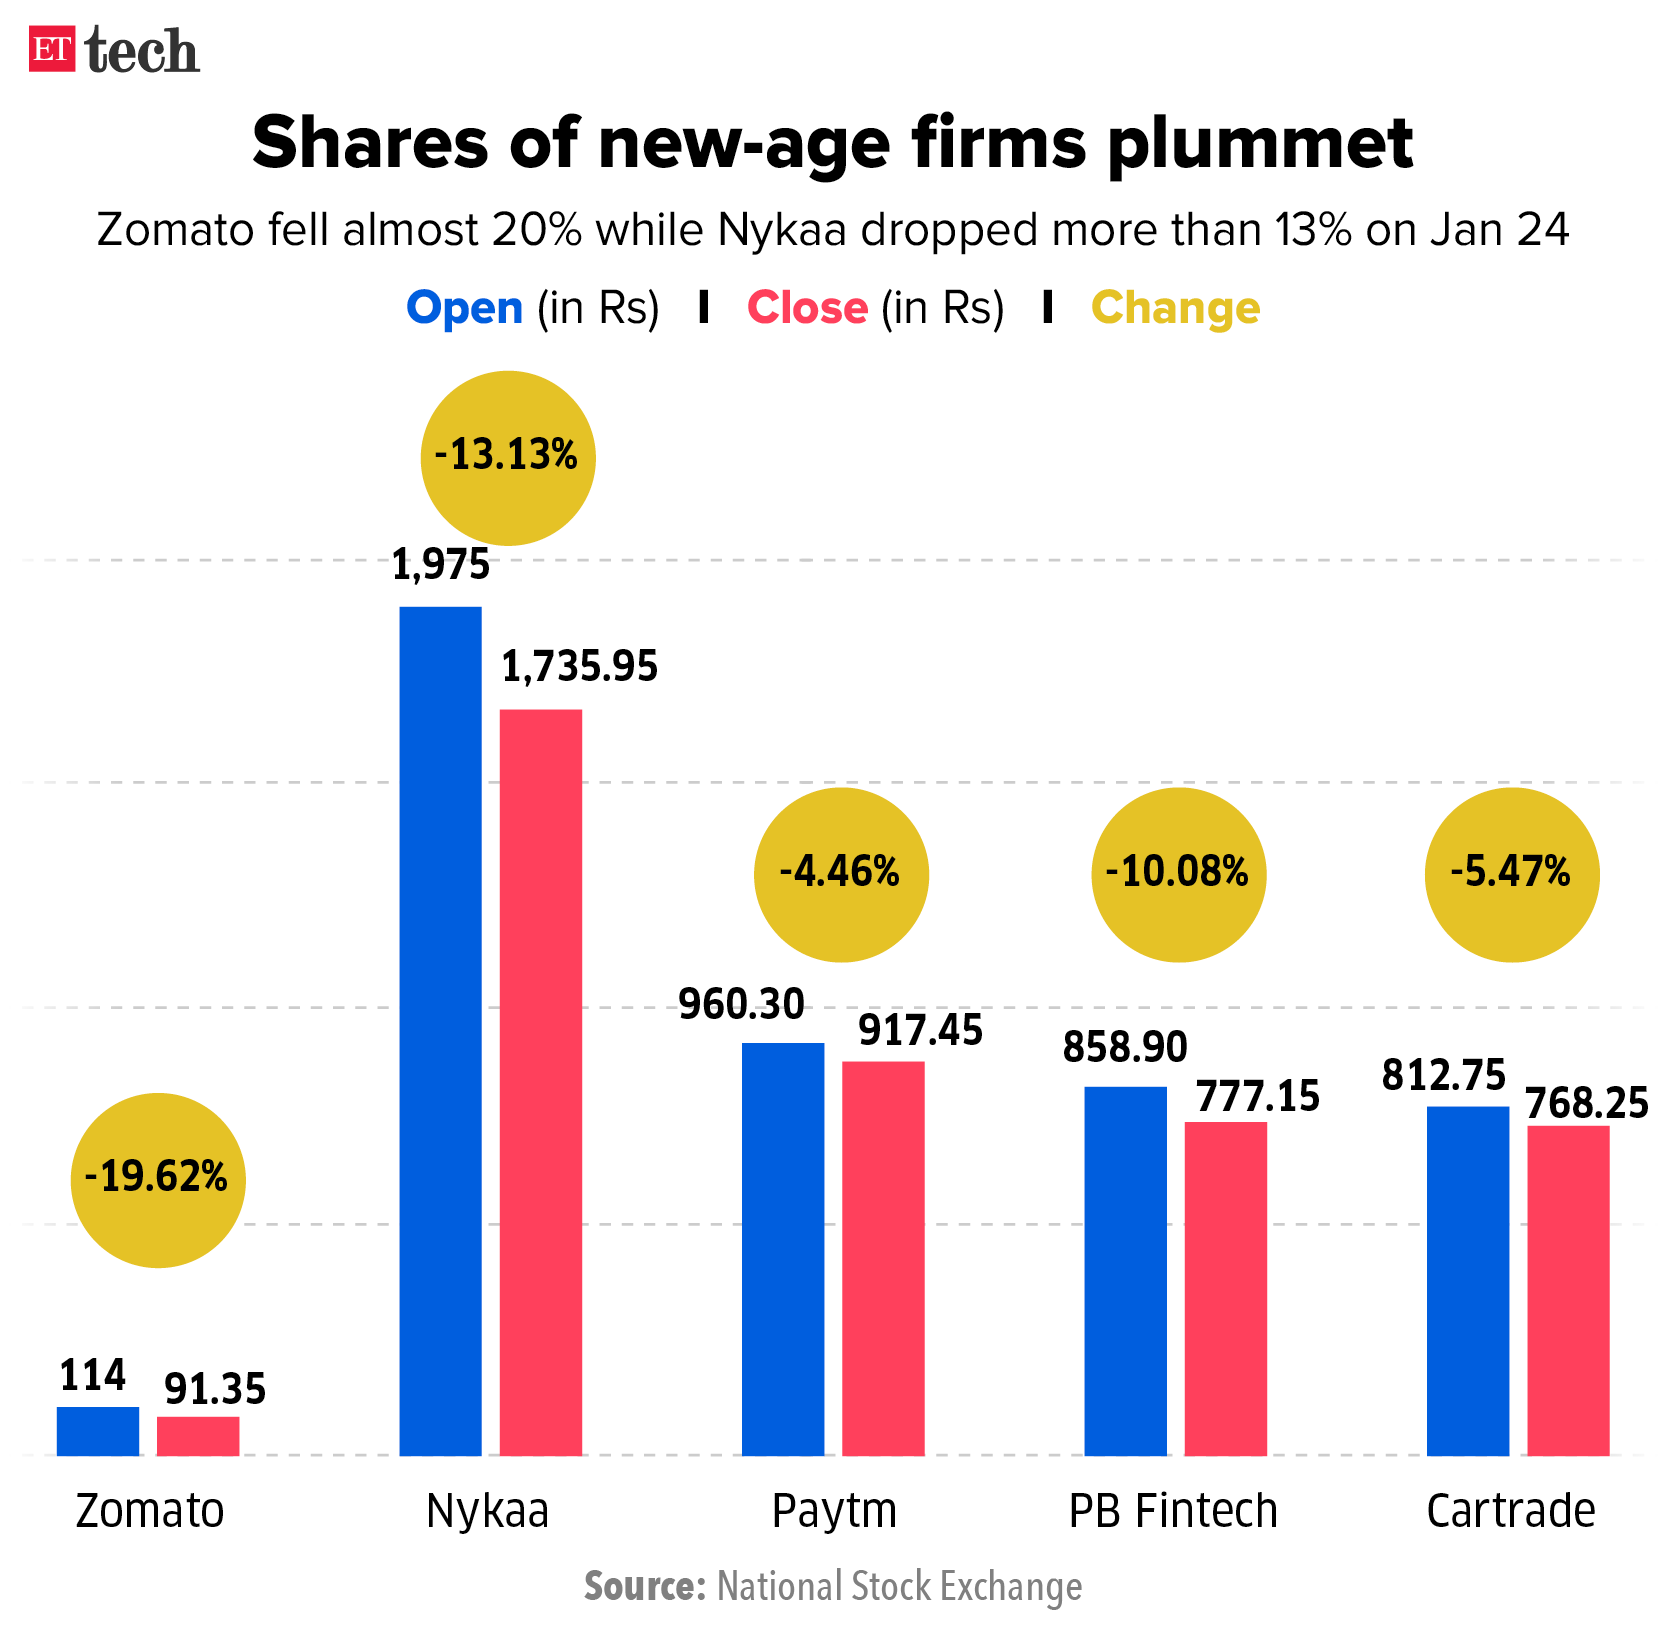 Shares of new-age firms